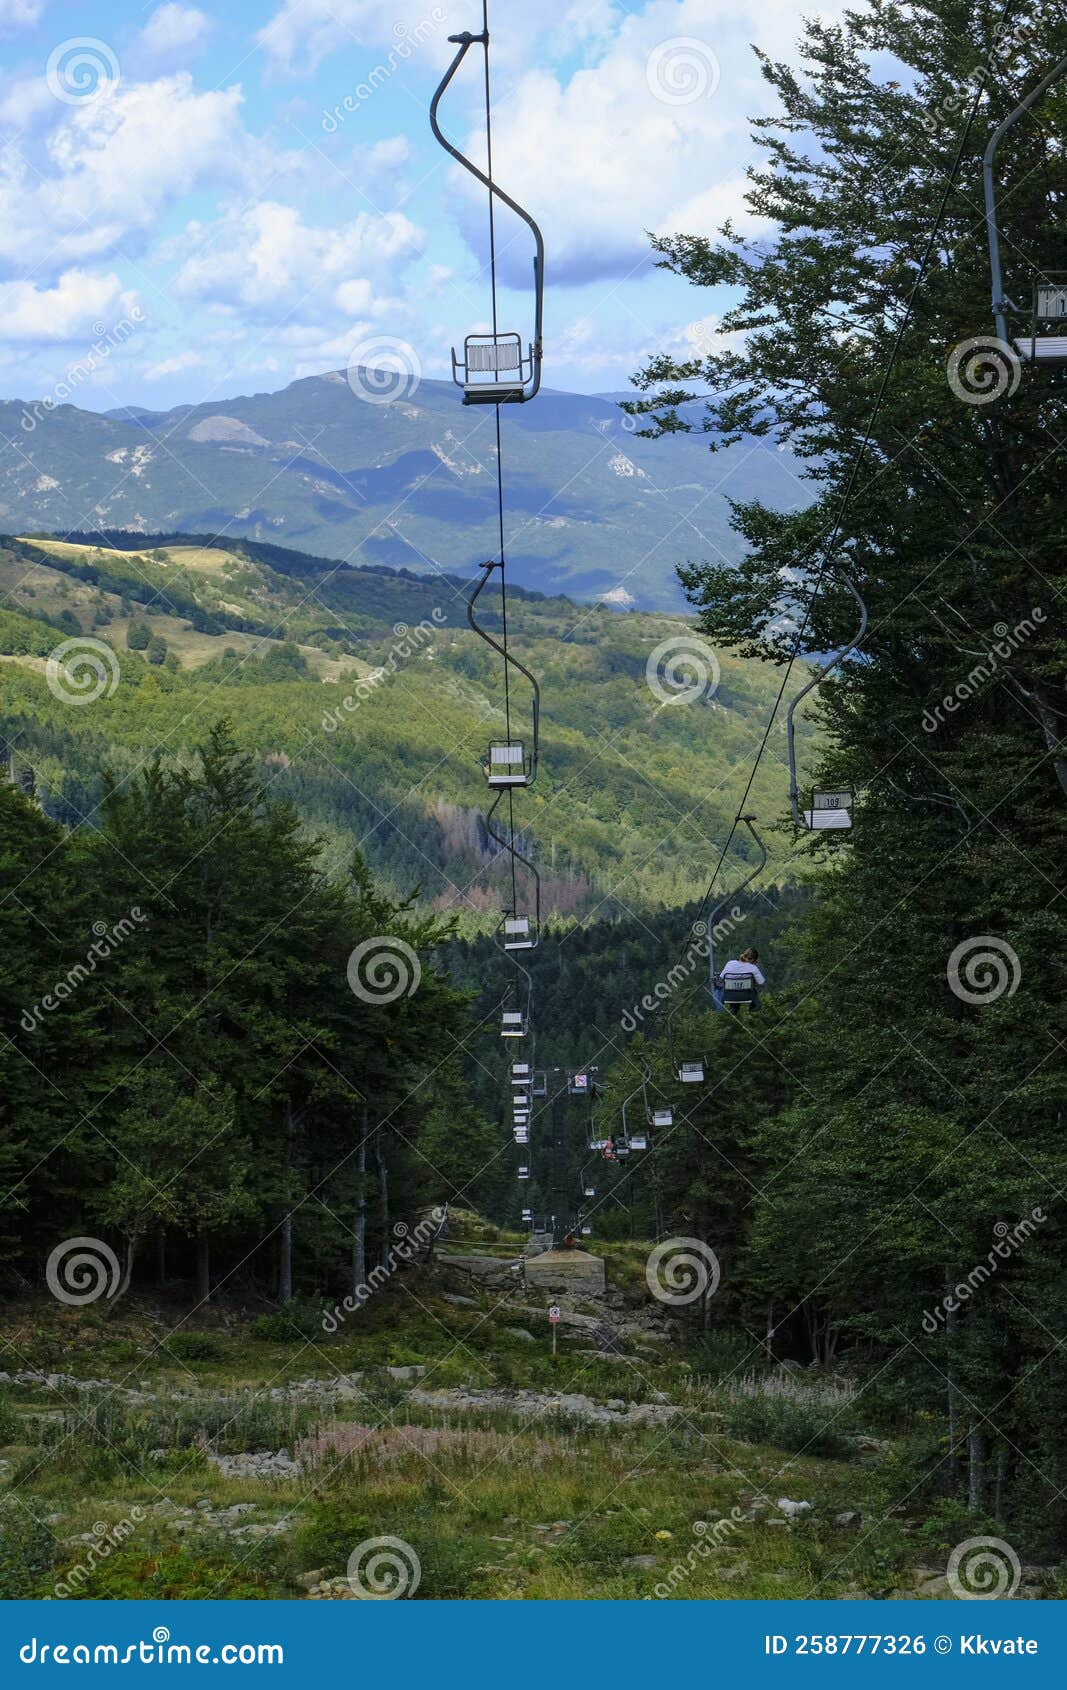 chairlift across the mountains and cloudy sky. national park appennino tosco-emiliano. lagdei, emilia-romagna